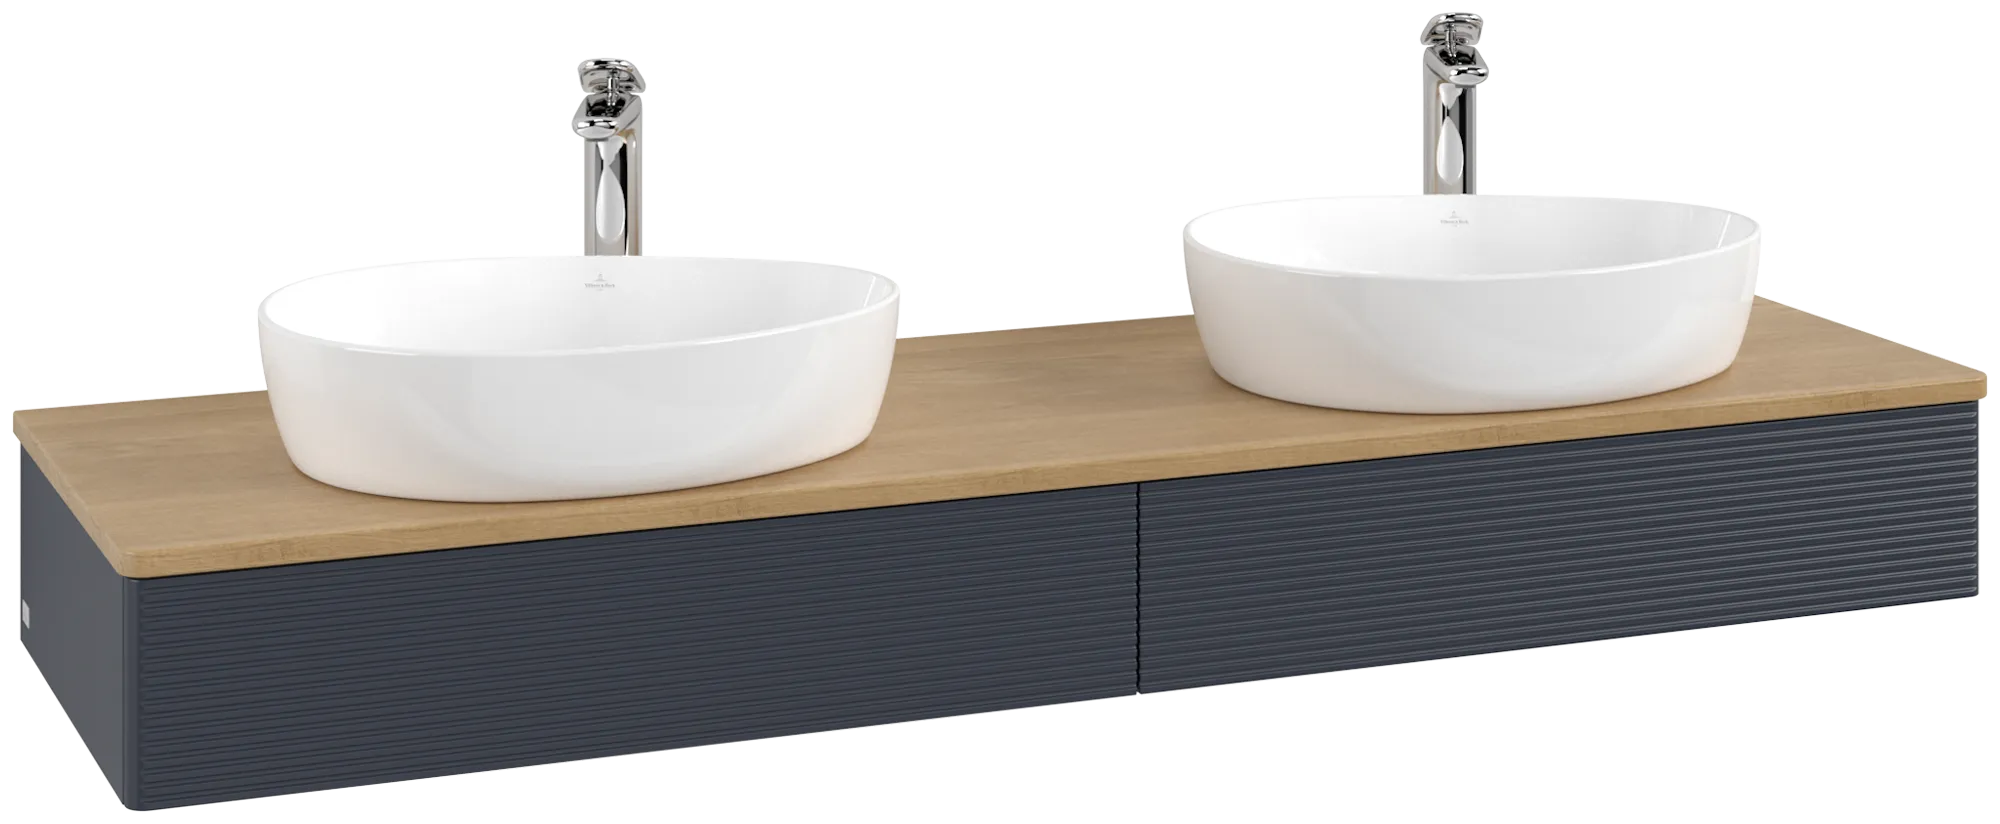 VILLEROY BOCH Antao Vanity unit, 2 pull-out compartments, 1600 x 190 x 500 mm, Front with grain texture, Midnight Blue Matt Lacquer / Honey Oak #K17151HG resmi